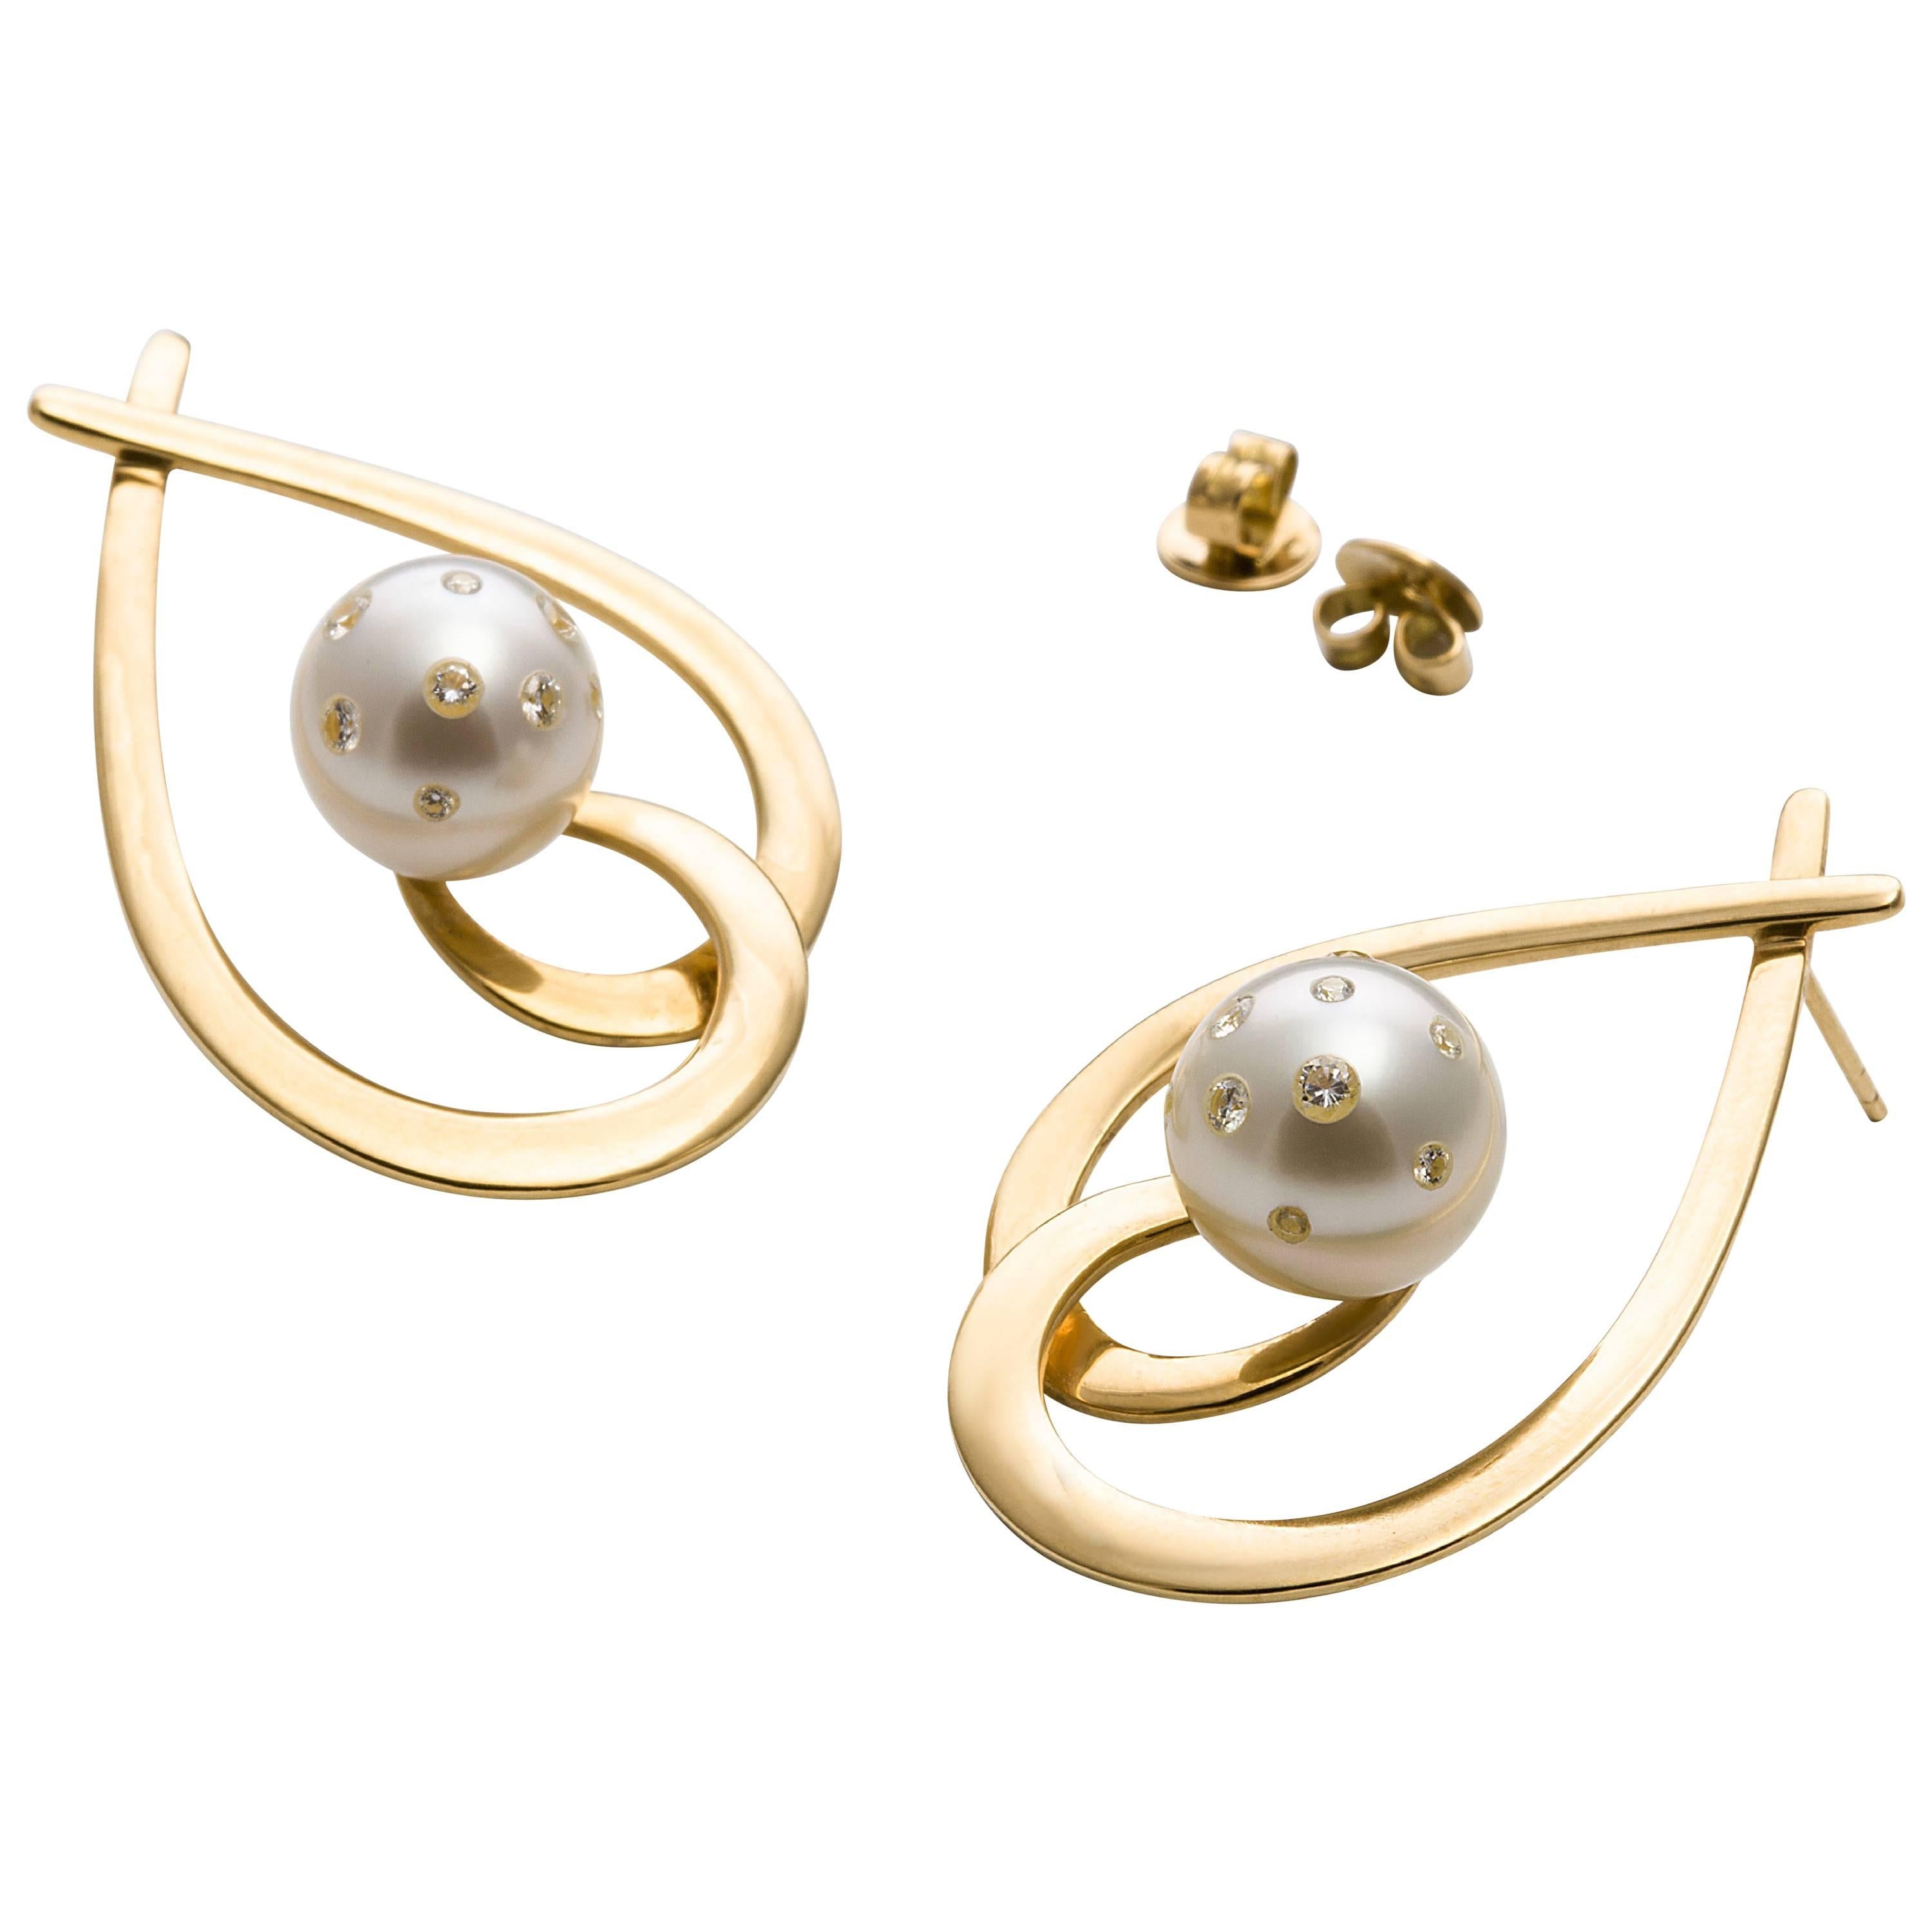 Contemorary design bring the Aria earrings alive with stunning South Sea pearls embellished with white brilliant cut diamonds.              

Aria Design (as the pair seen on the banner model) are 18 carat yellow gold with a highly polished finish